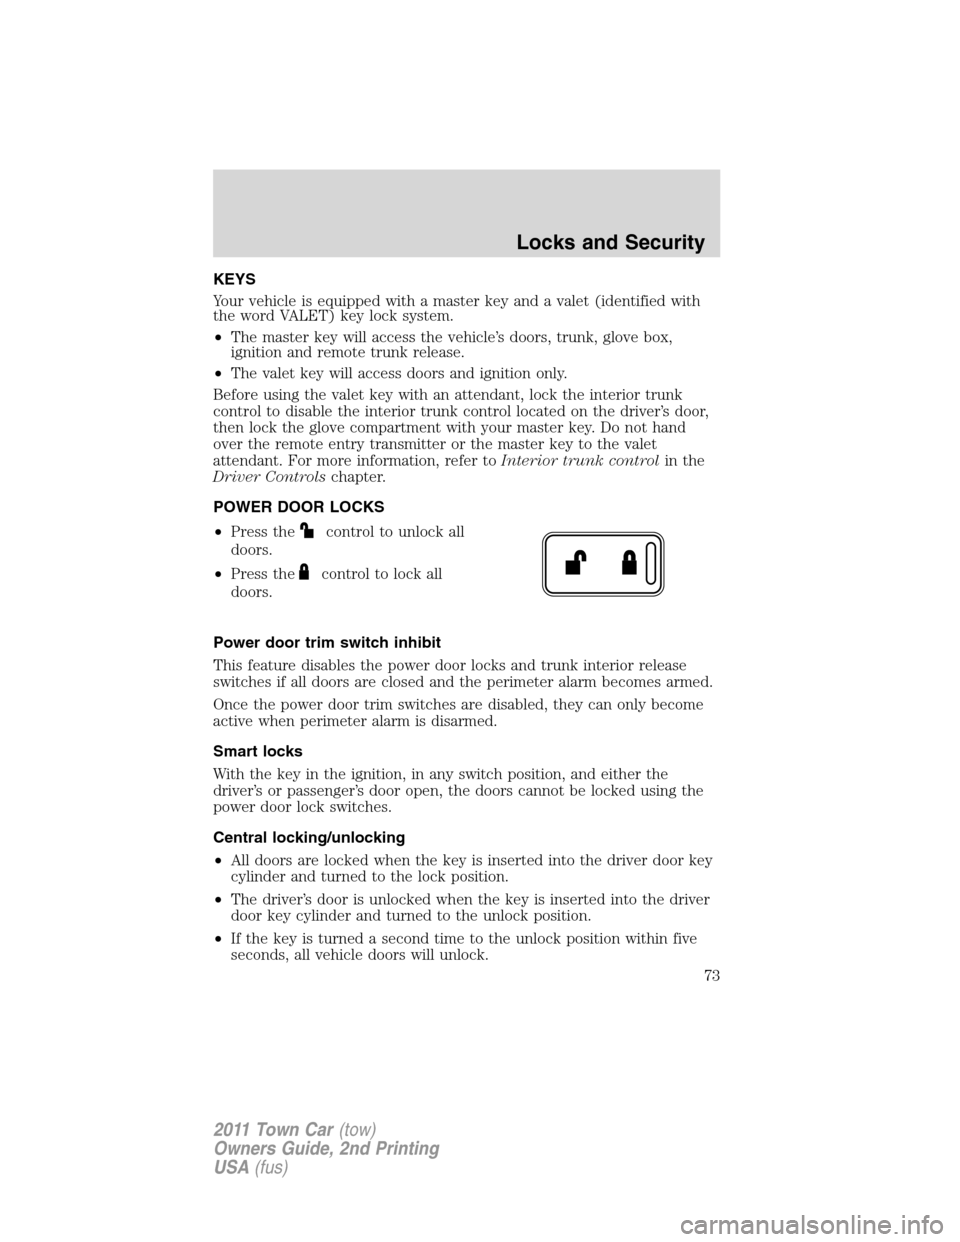 LINCOLN TOWN CAR 2011  Owners Manual KEYS
Your vehicle is equipped with a master key and a valet (identified with
the word VALET) key lock system.
•The master key will access the vehicle’s doors, trunk, glove box,
ignition and remote